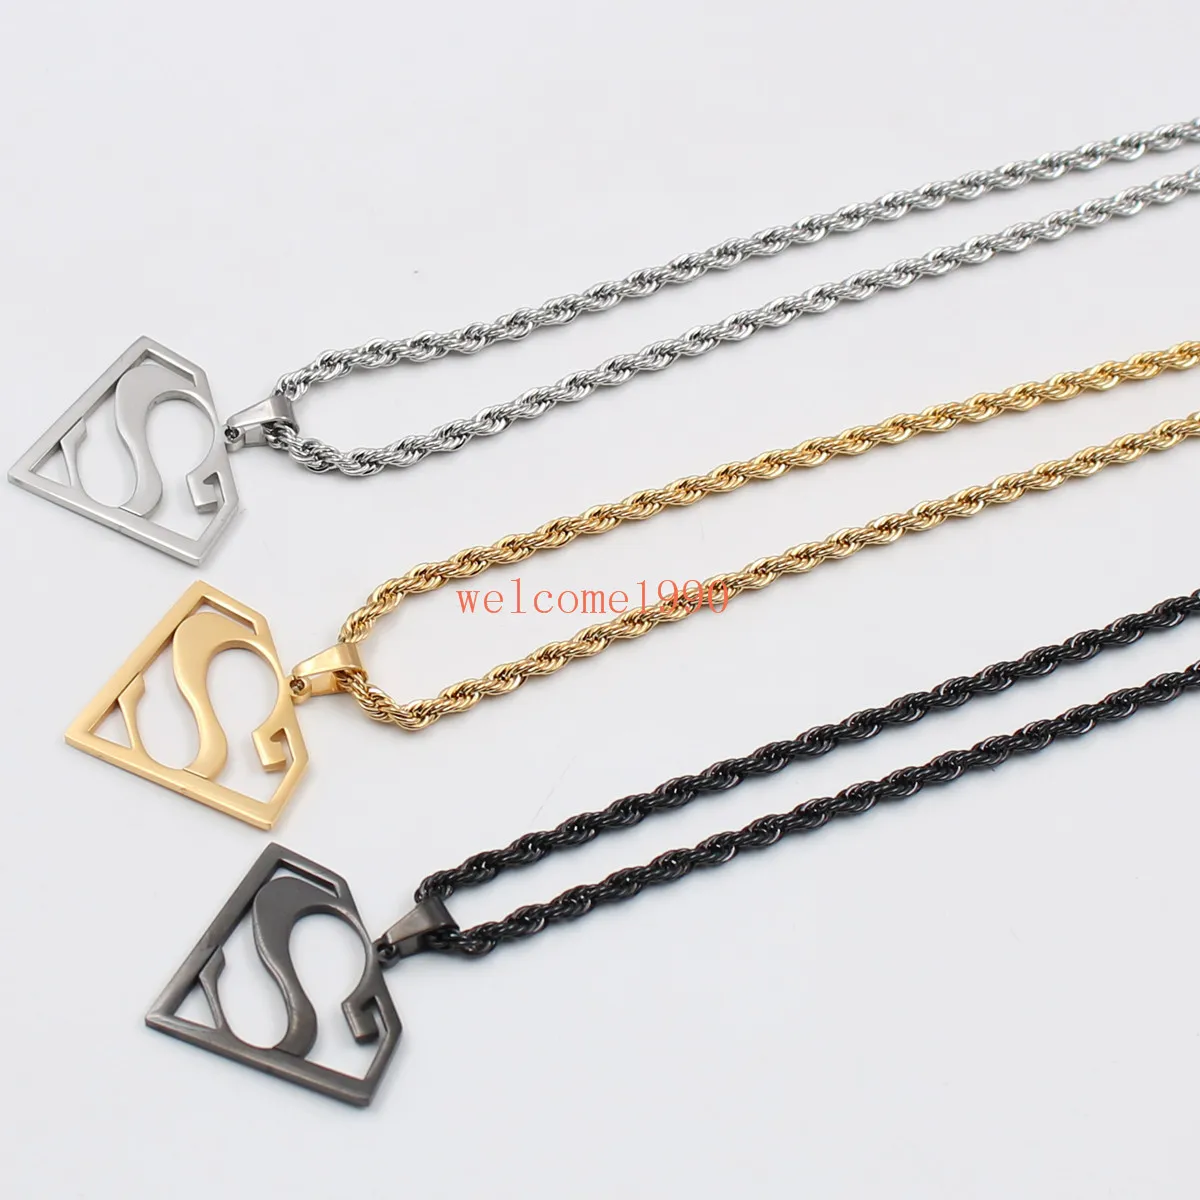 choose Gold silver black Stainless Steel 15 inch Superman logo Pendant Men039s Gifts Fashion Rope chain necklace 22 inch 4mm5652373